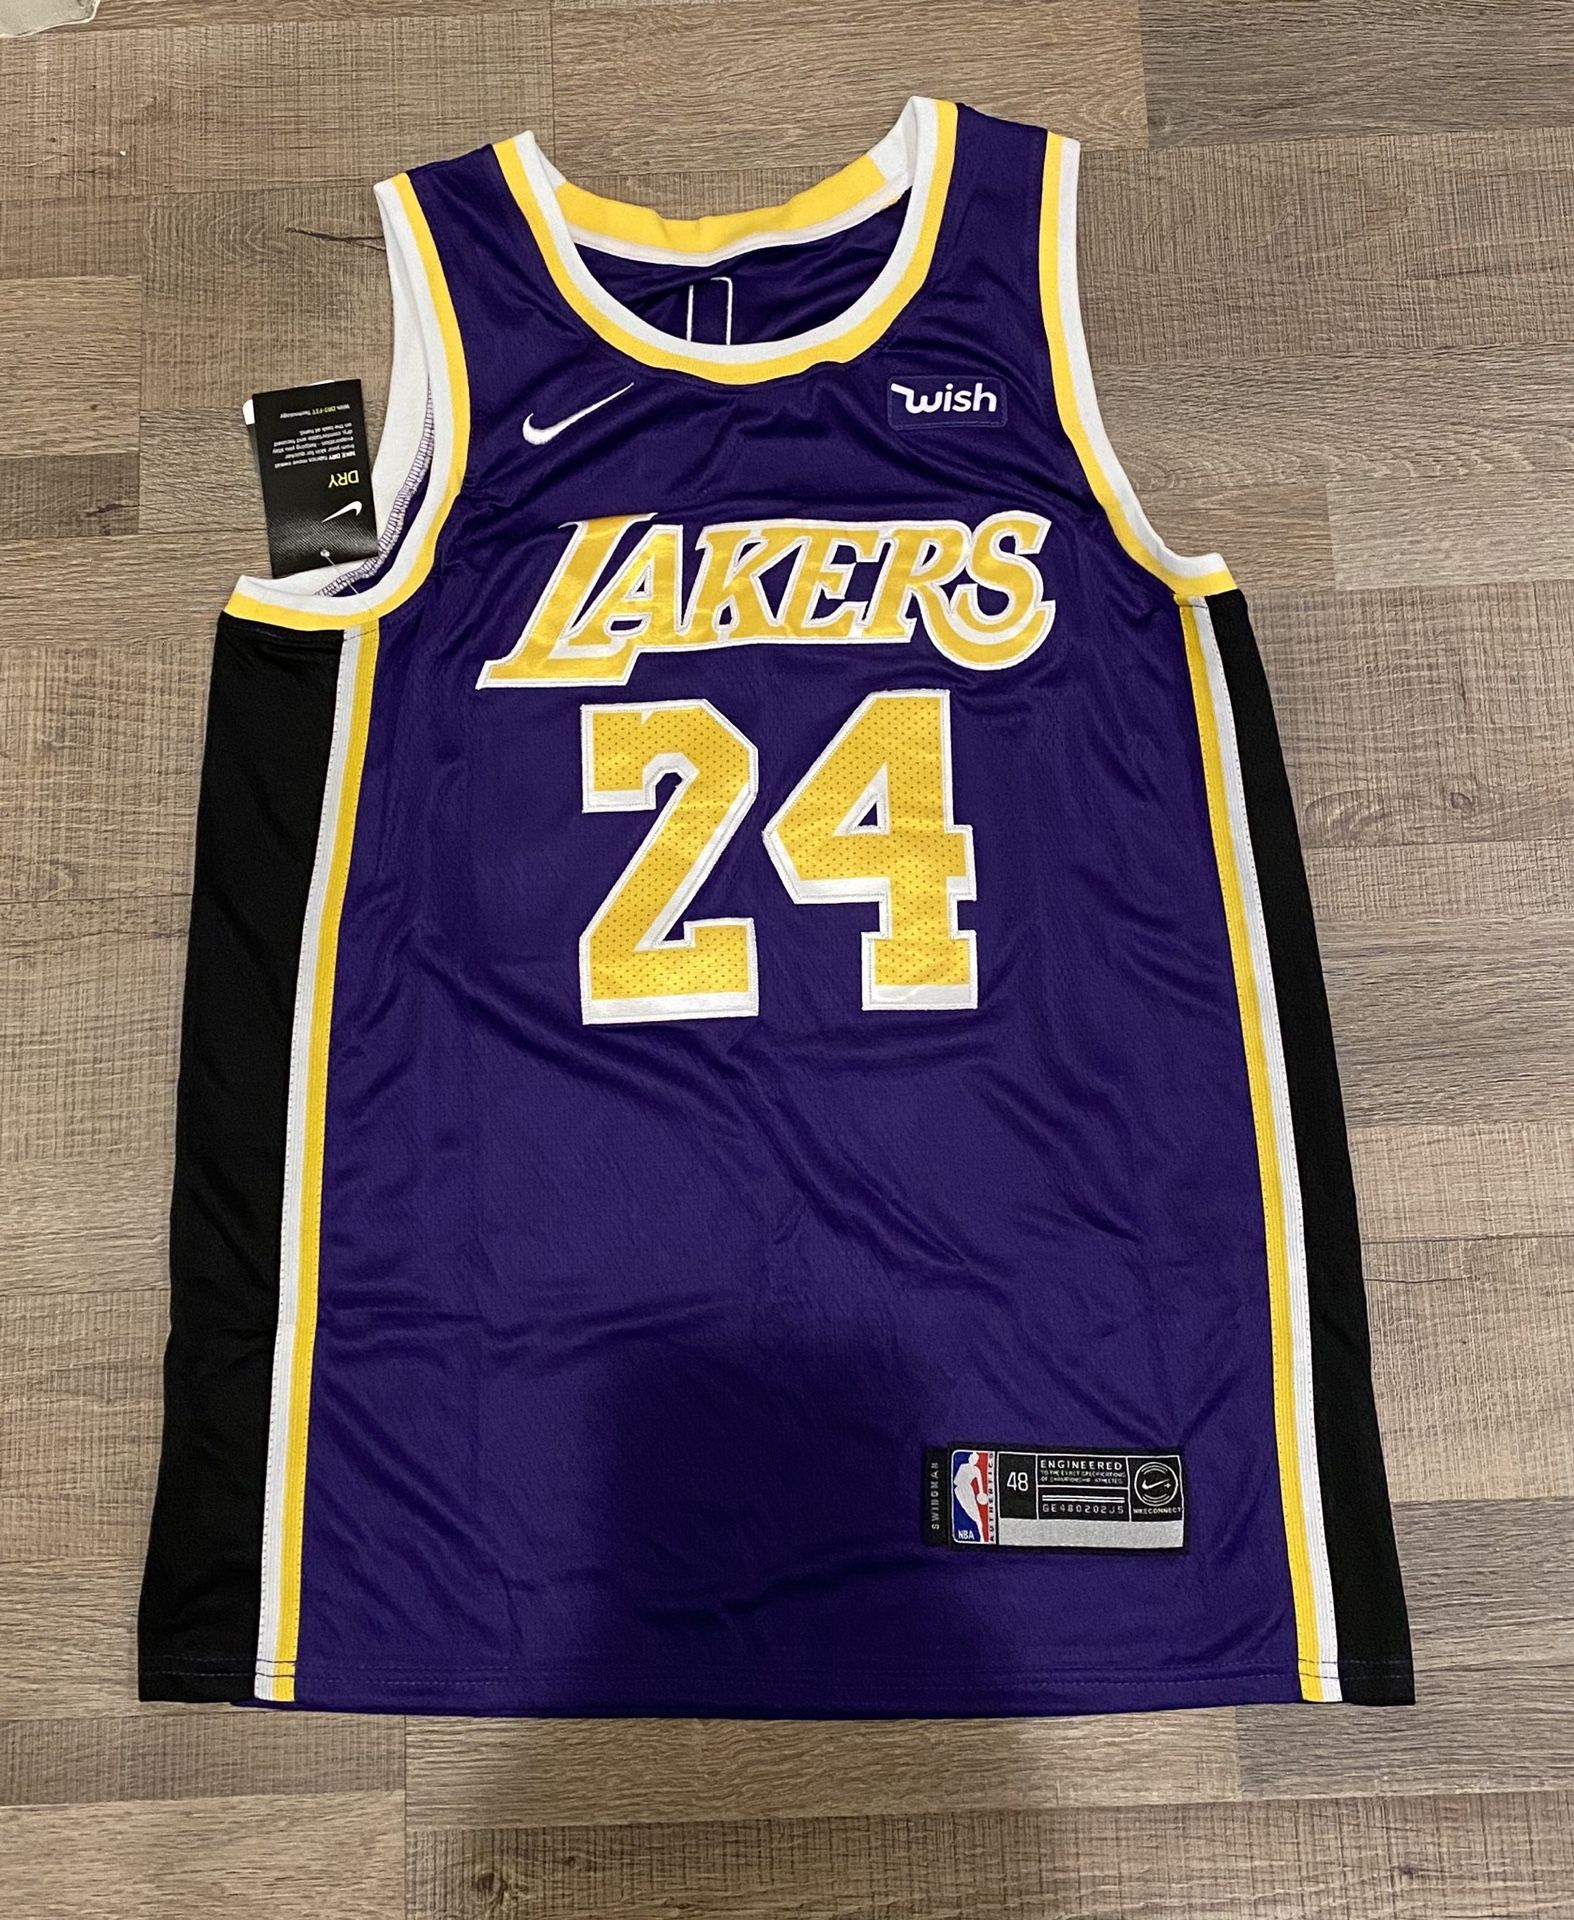 Vintage Nike Kobe Bryant Lakers Jersey Size Medium for Sale in Chicago, IL  - OfferUp